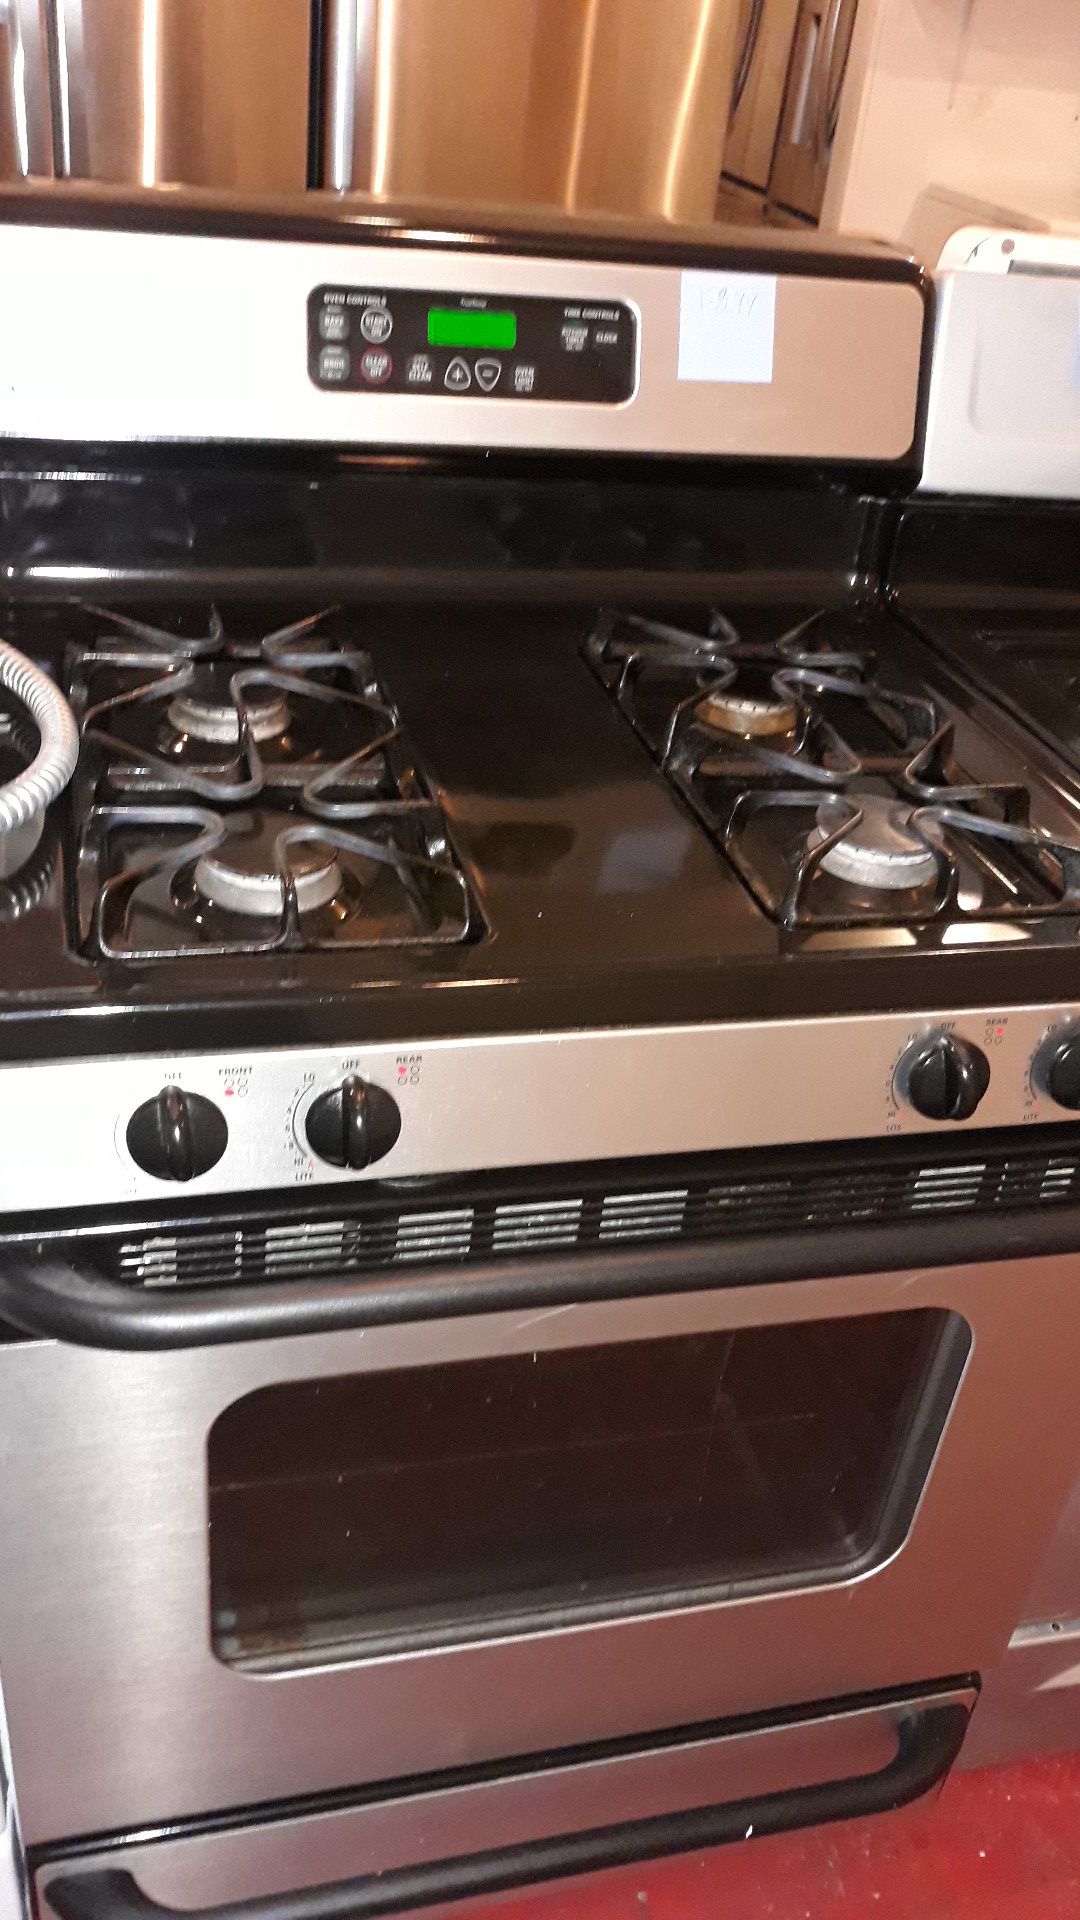 Stainless steel gas stove excellent condition 4months warranty